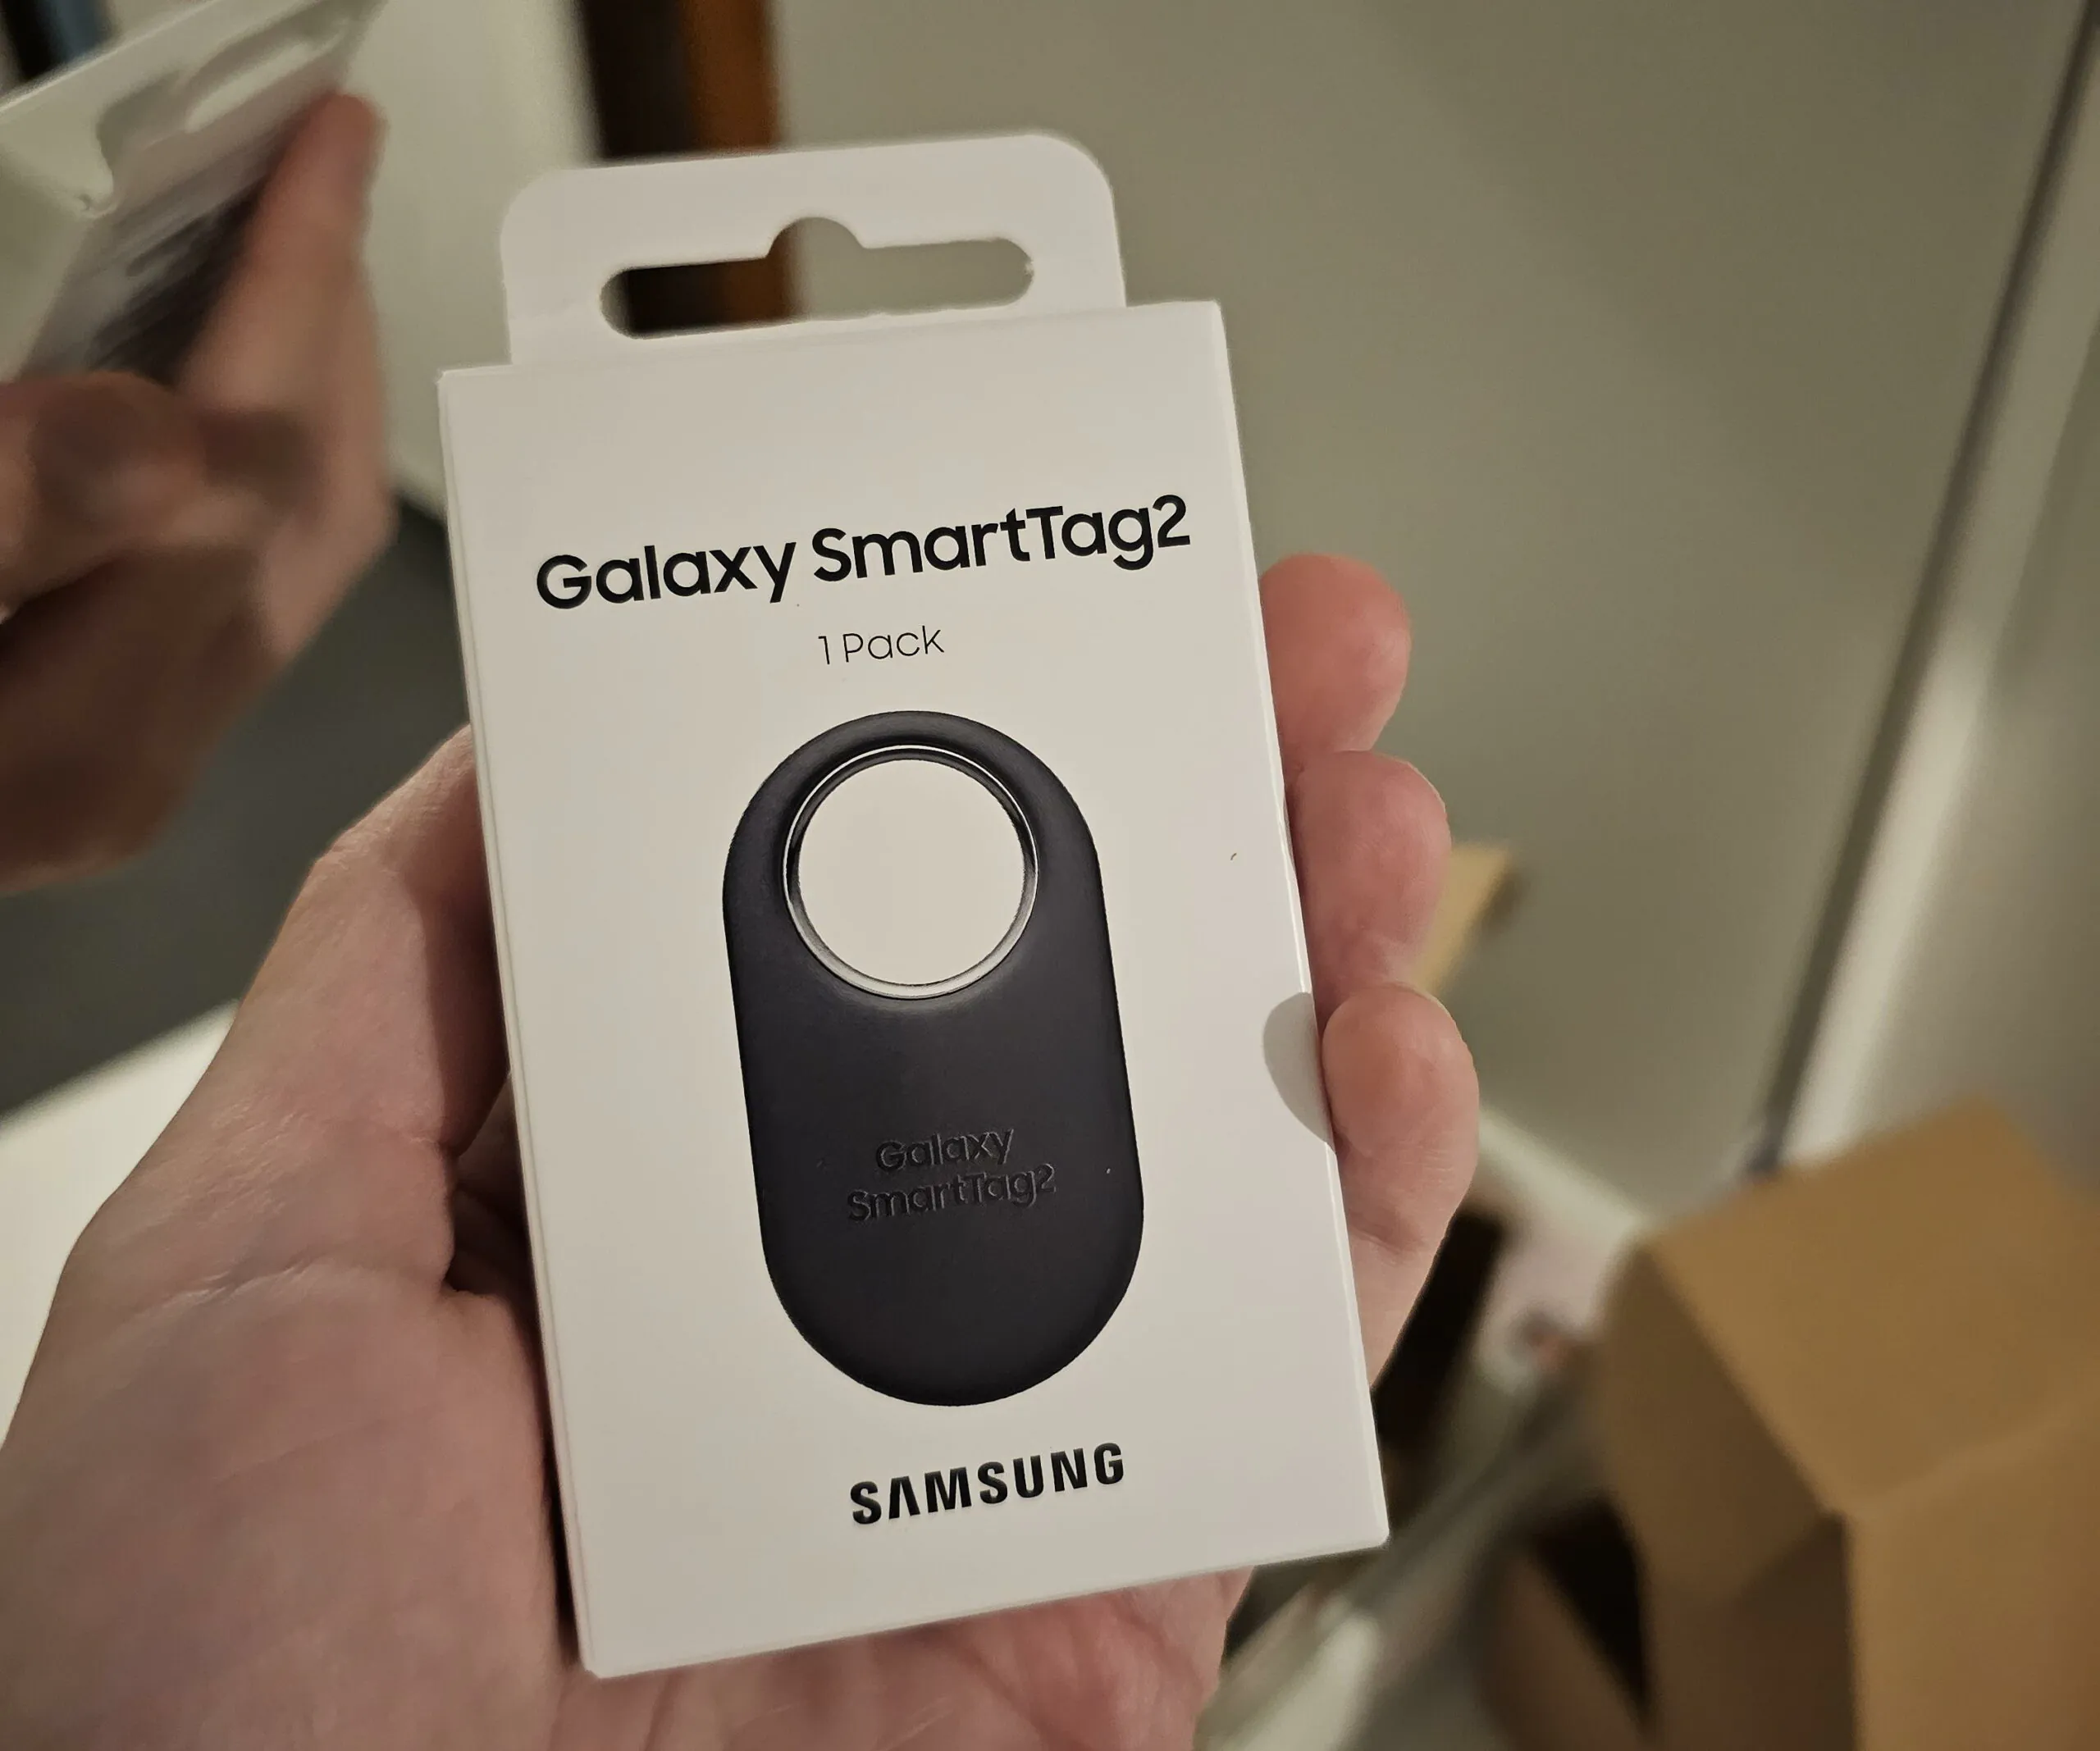 Samsung's Galaxy SmartTag 2 Tracker Gets 2-year Battery Life and UWB